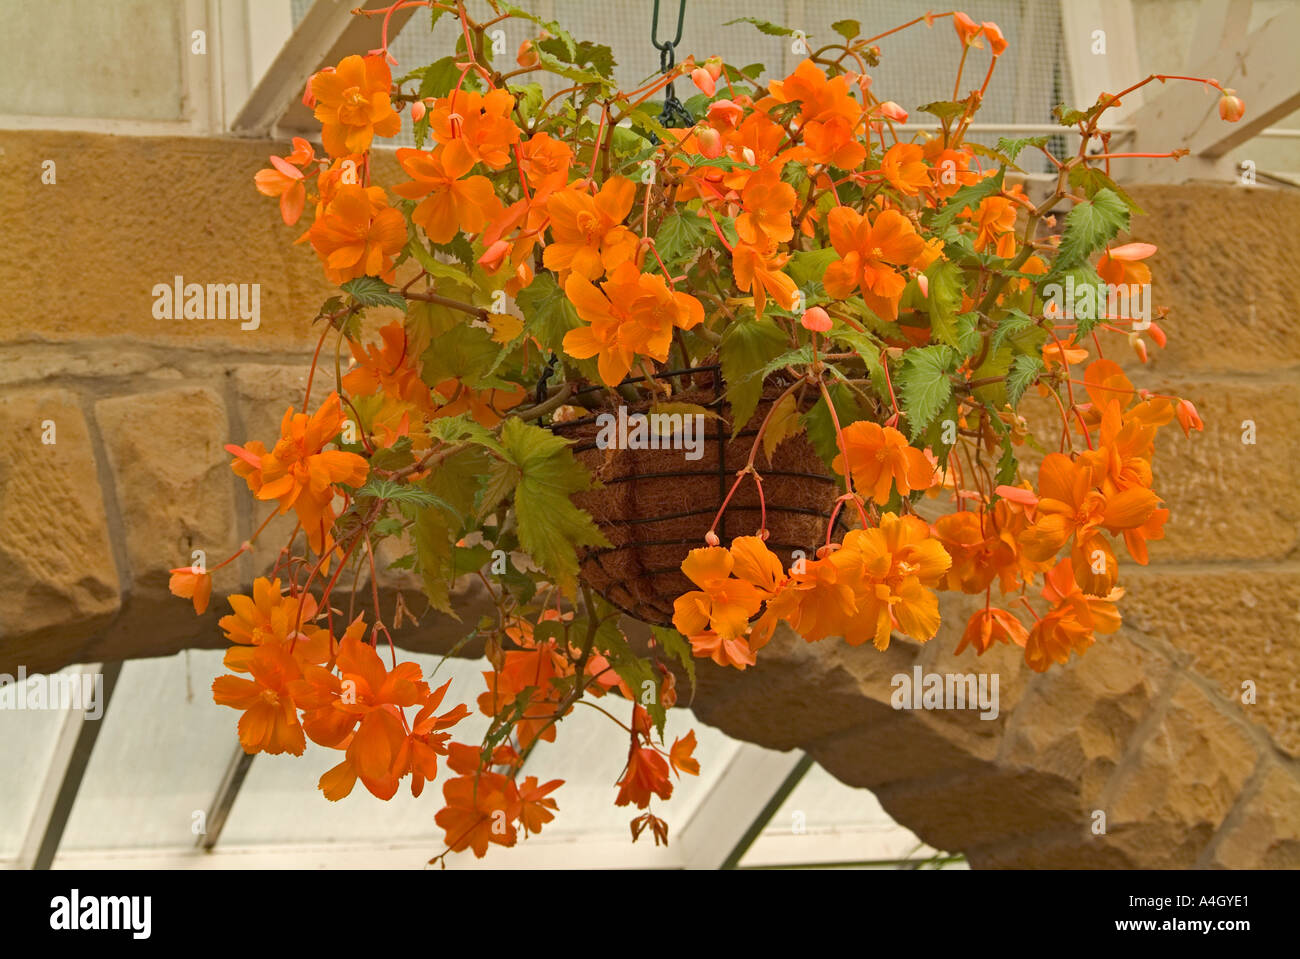 Begonia pendula a hanging variety of begonia usually grown in baskets Stock Photo